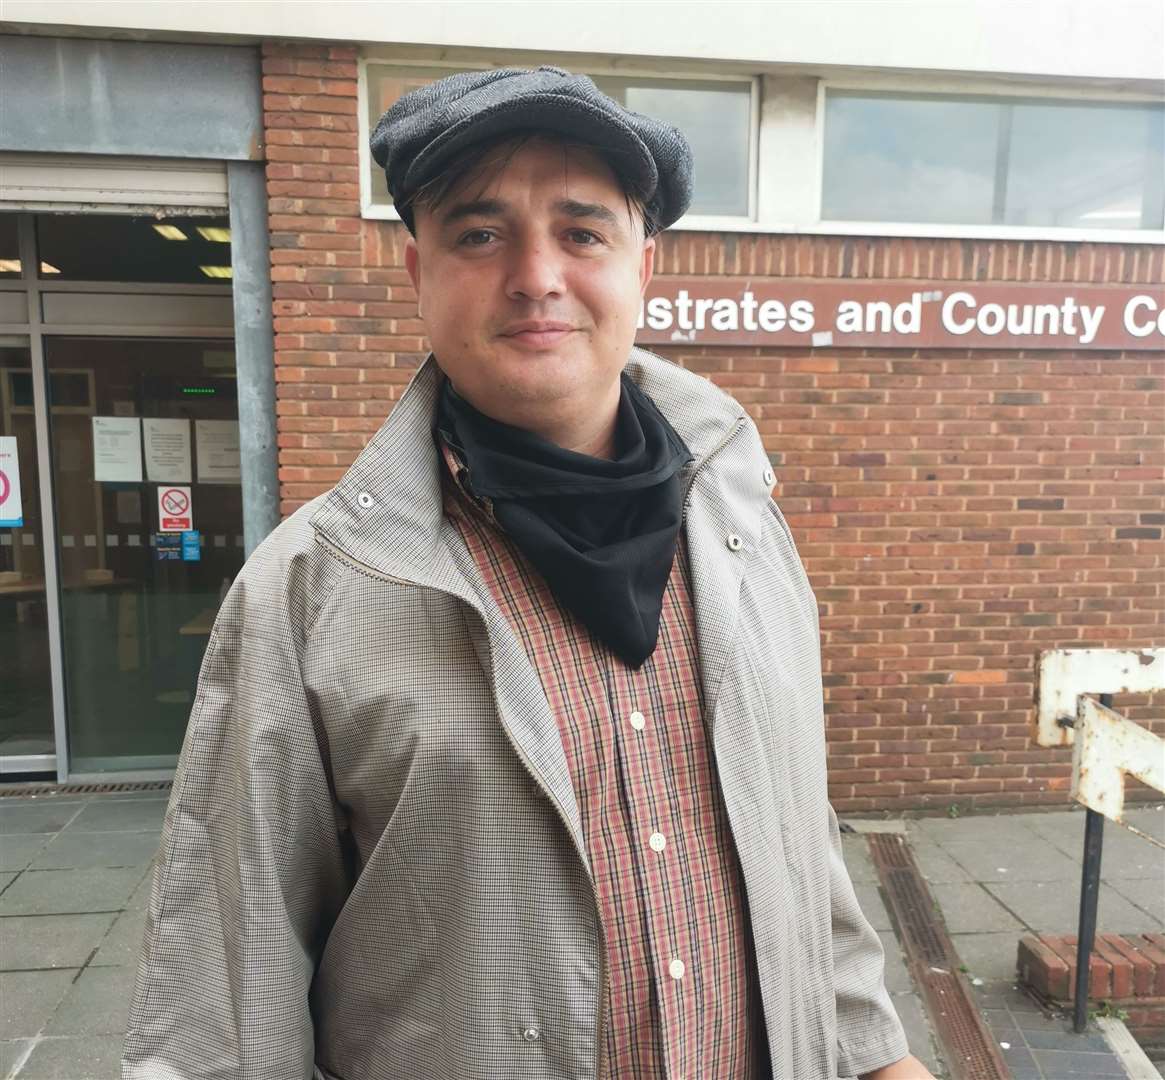 Pete Doherty outside Margate Magistrates' Court today after being hit with a £6k fine